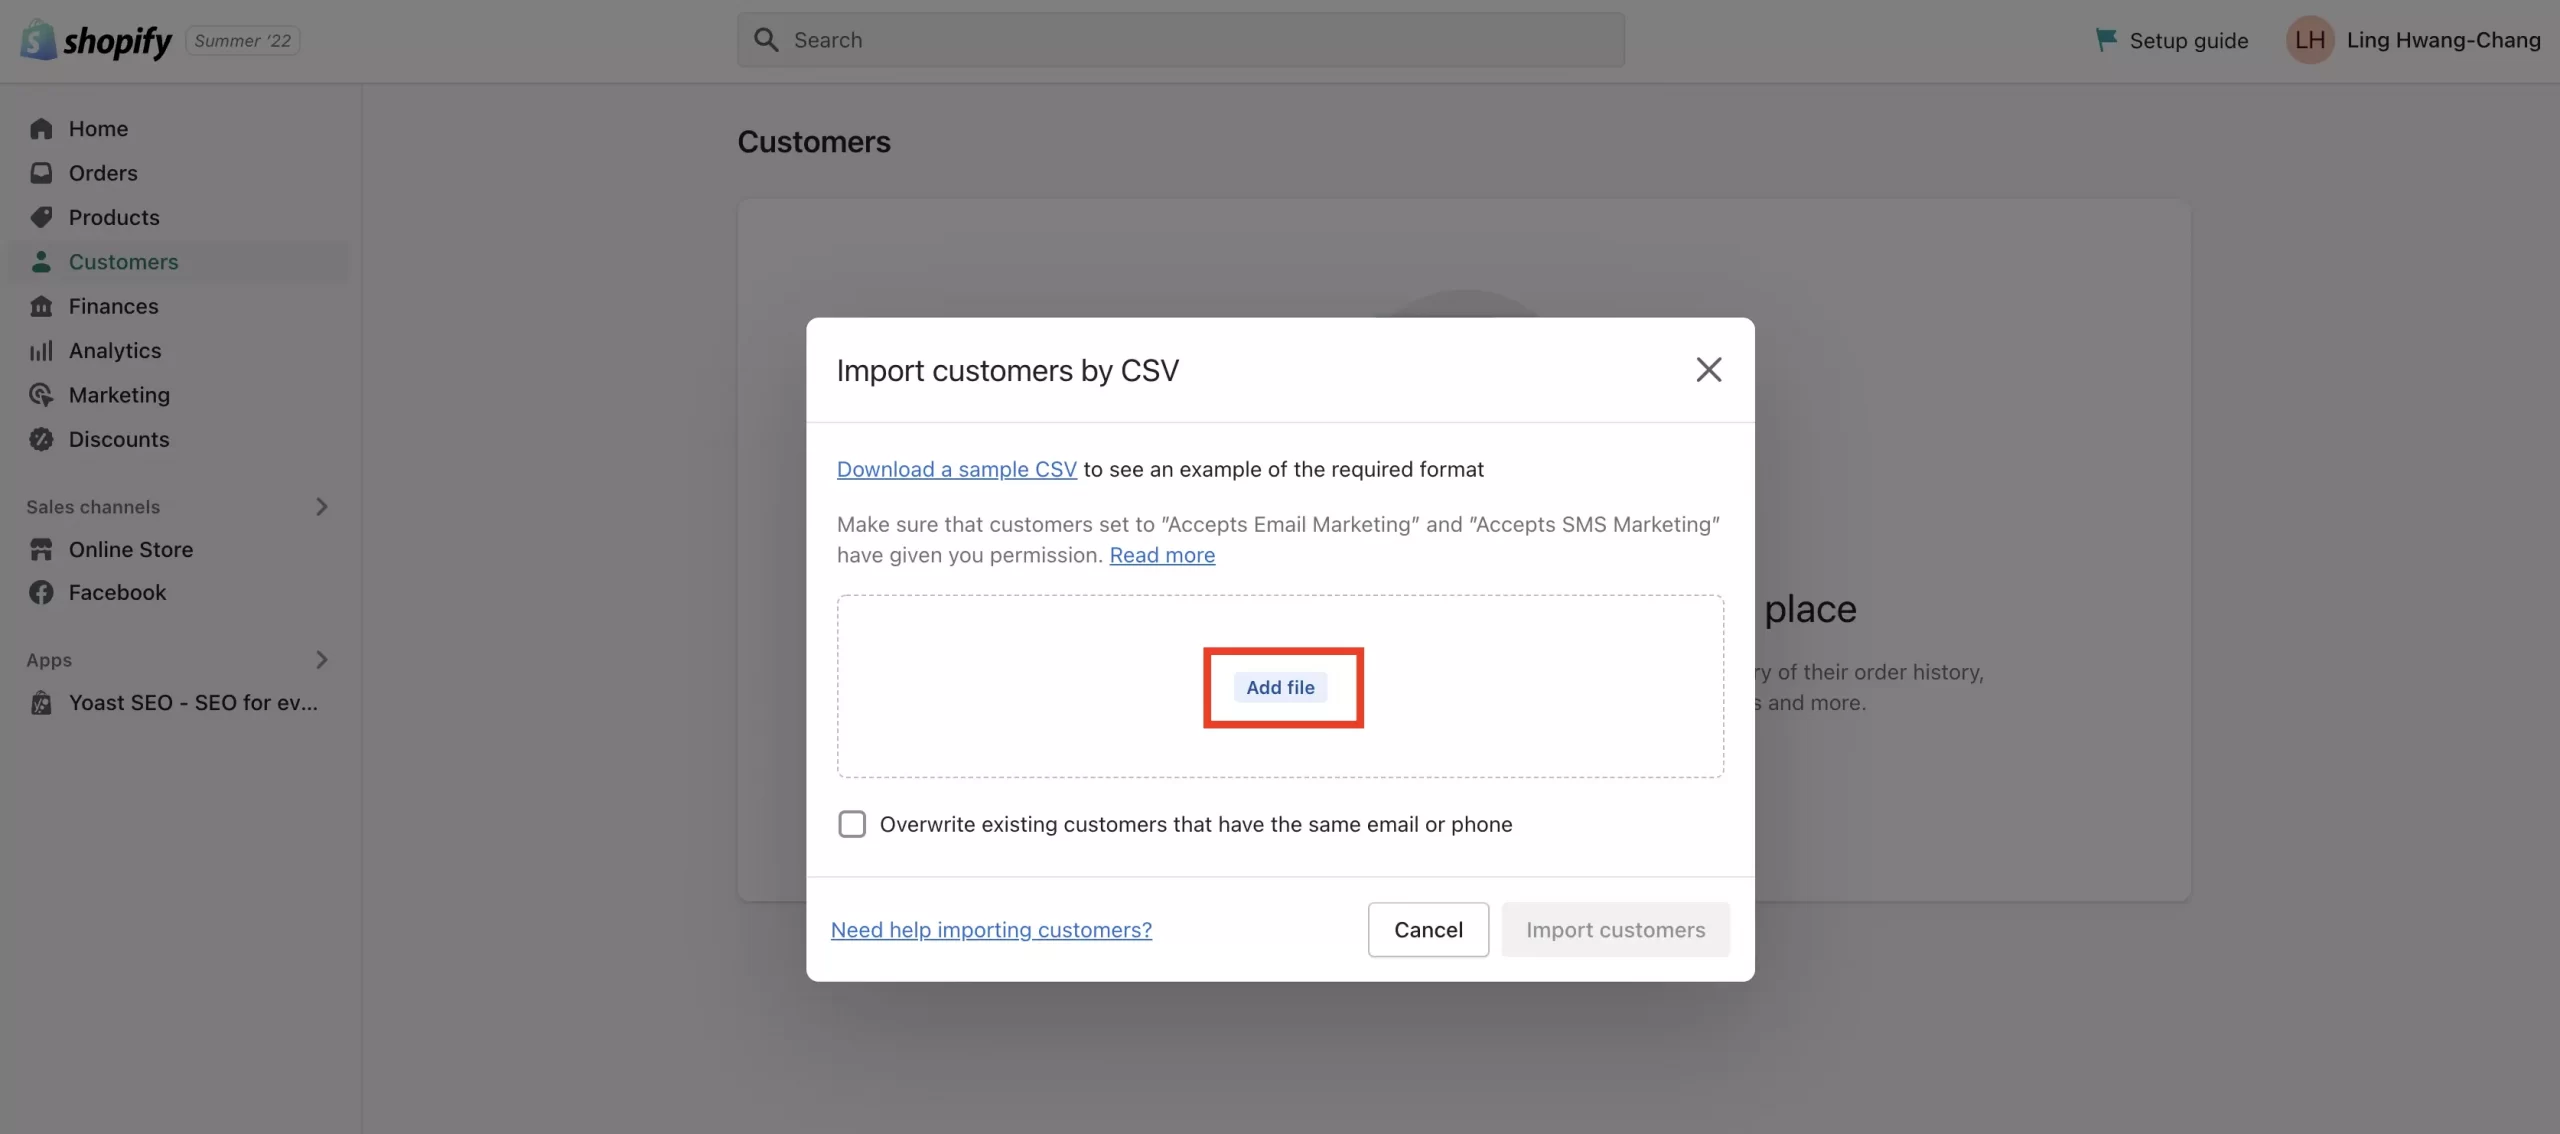 import customers to shopify